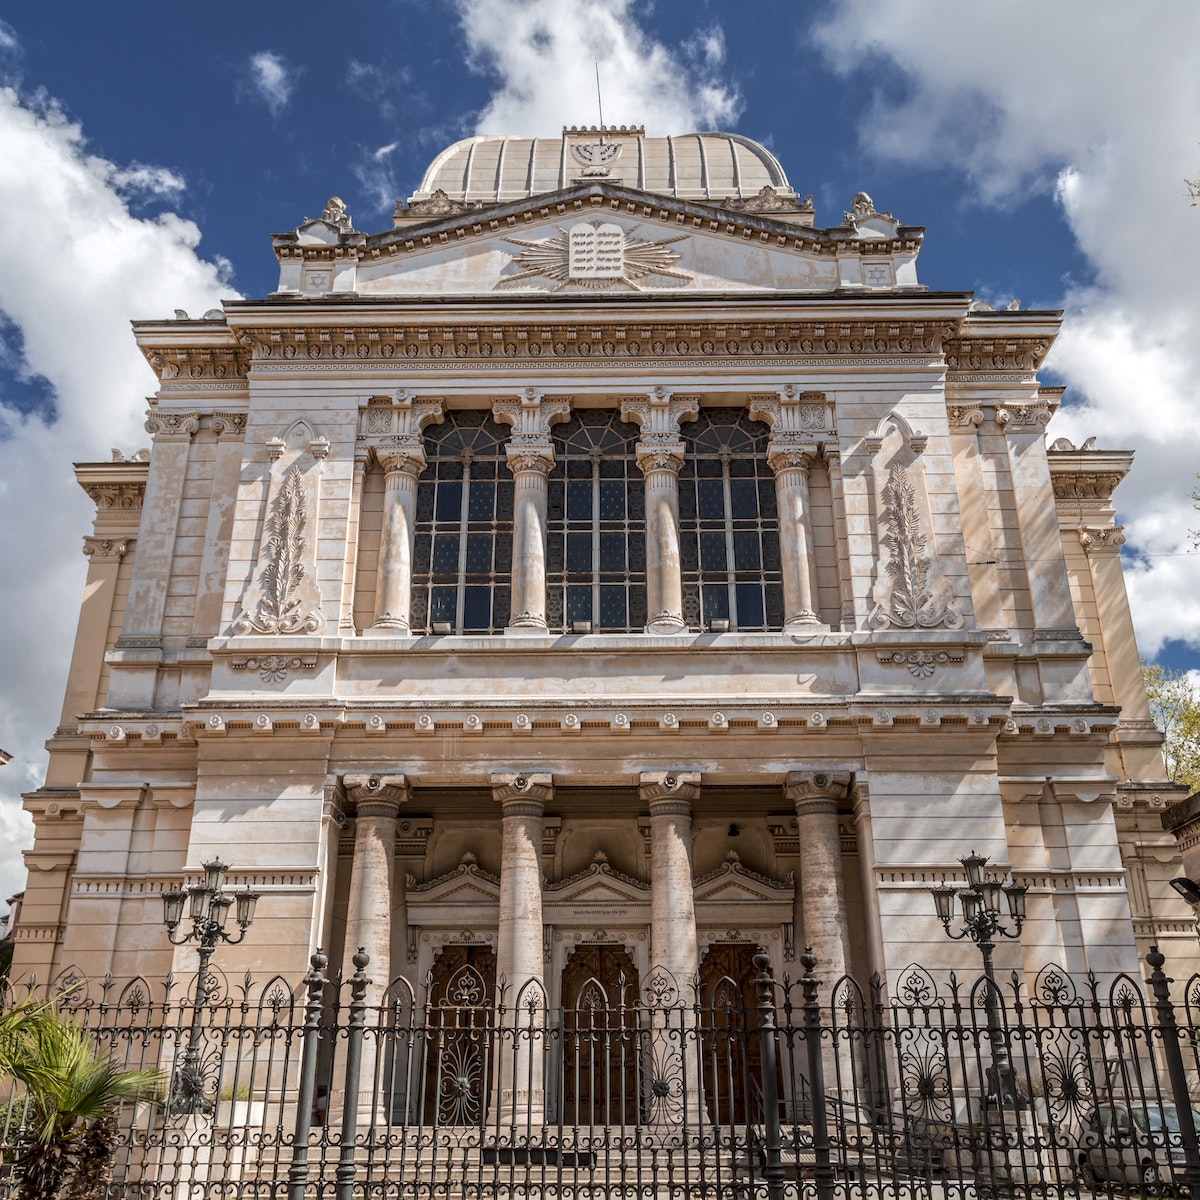 Rome, Italy - April 7, 2019: Tempio Maggiore or The Great Synagogue is the largest synagogue in Rome and one of the greatest in Europe. Located in the old Jewish Ghetto.
1172187631
tempio maggiore di roma, great synagogue of rome